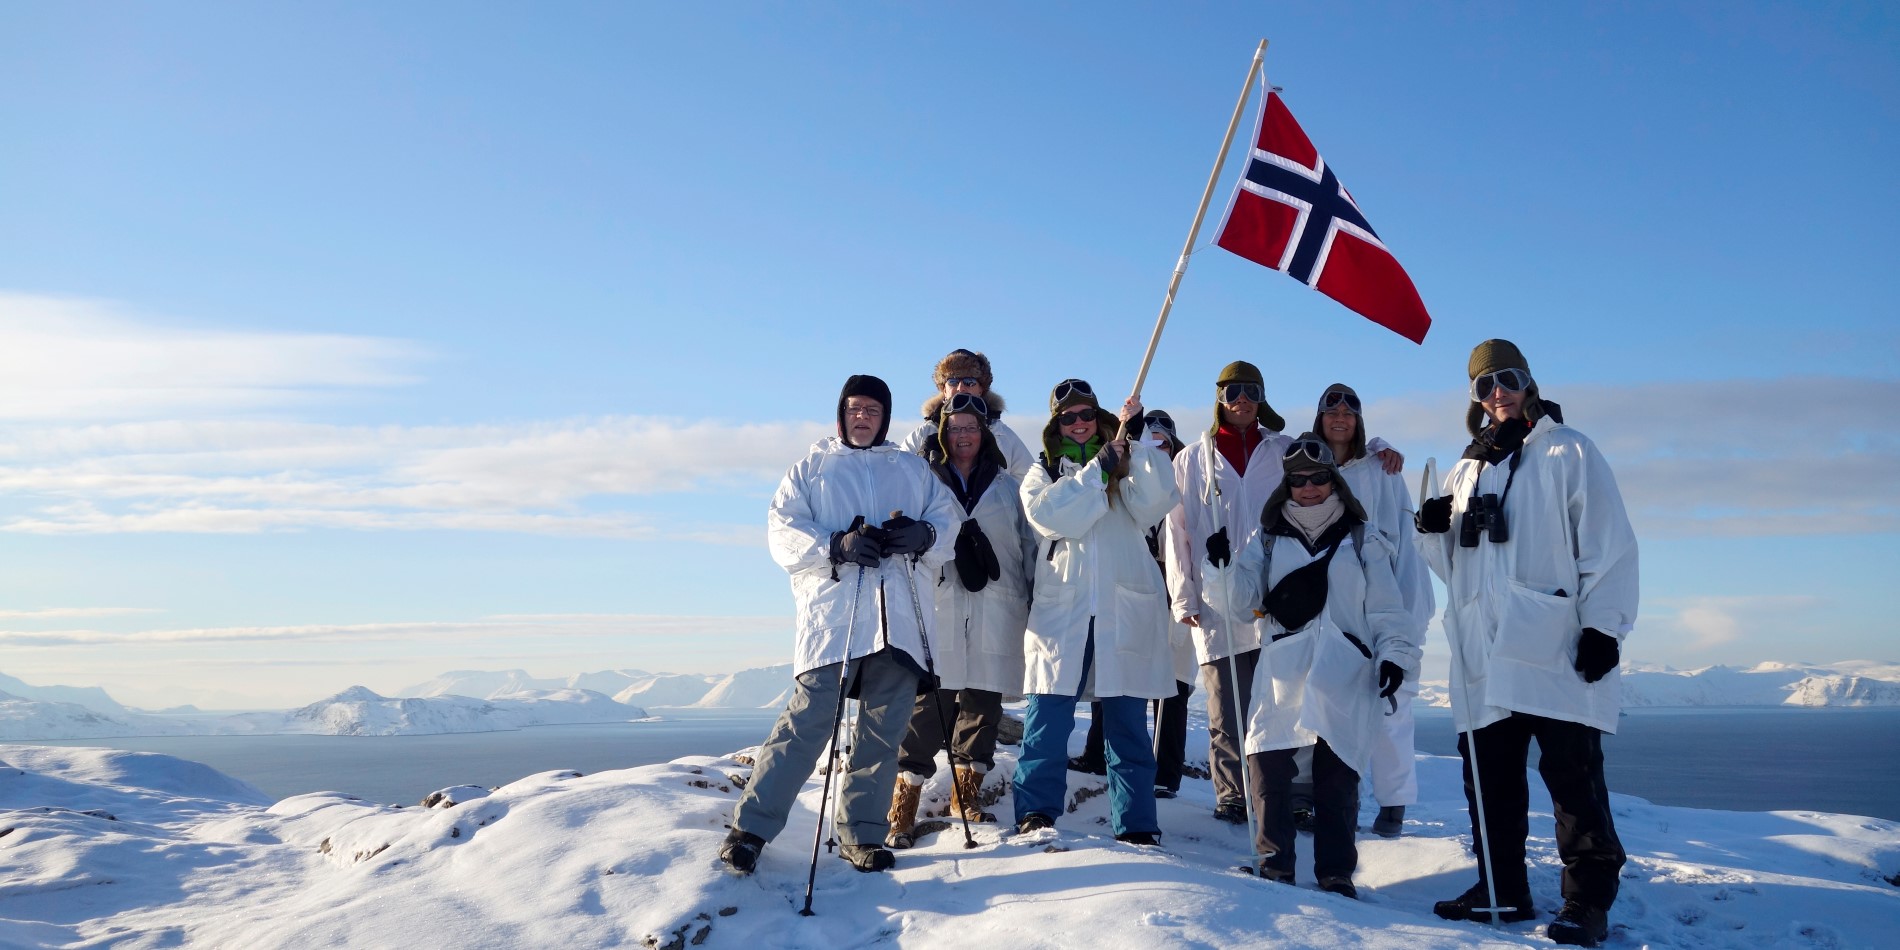 A group of 8 people in matching white jackets are waiving a Norwegian flag on top of a mountain top in Northern Norway